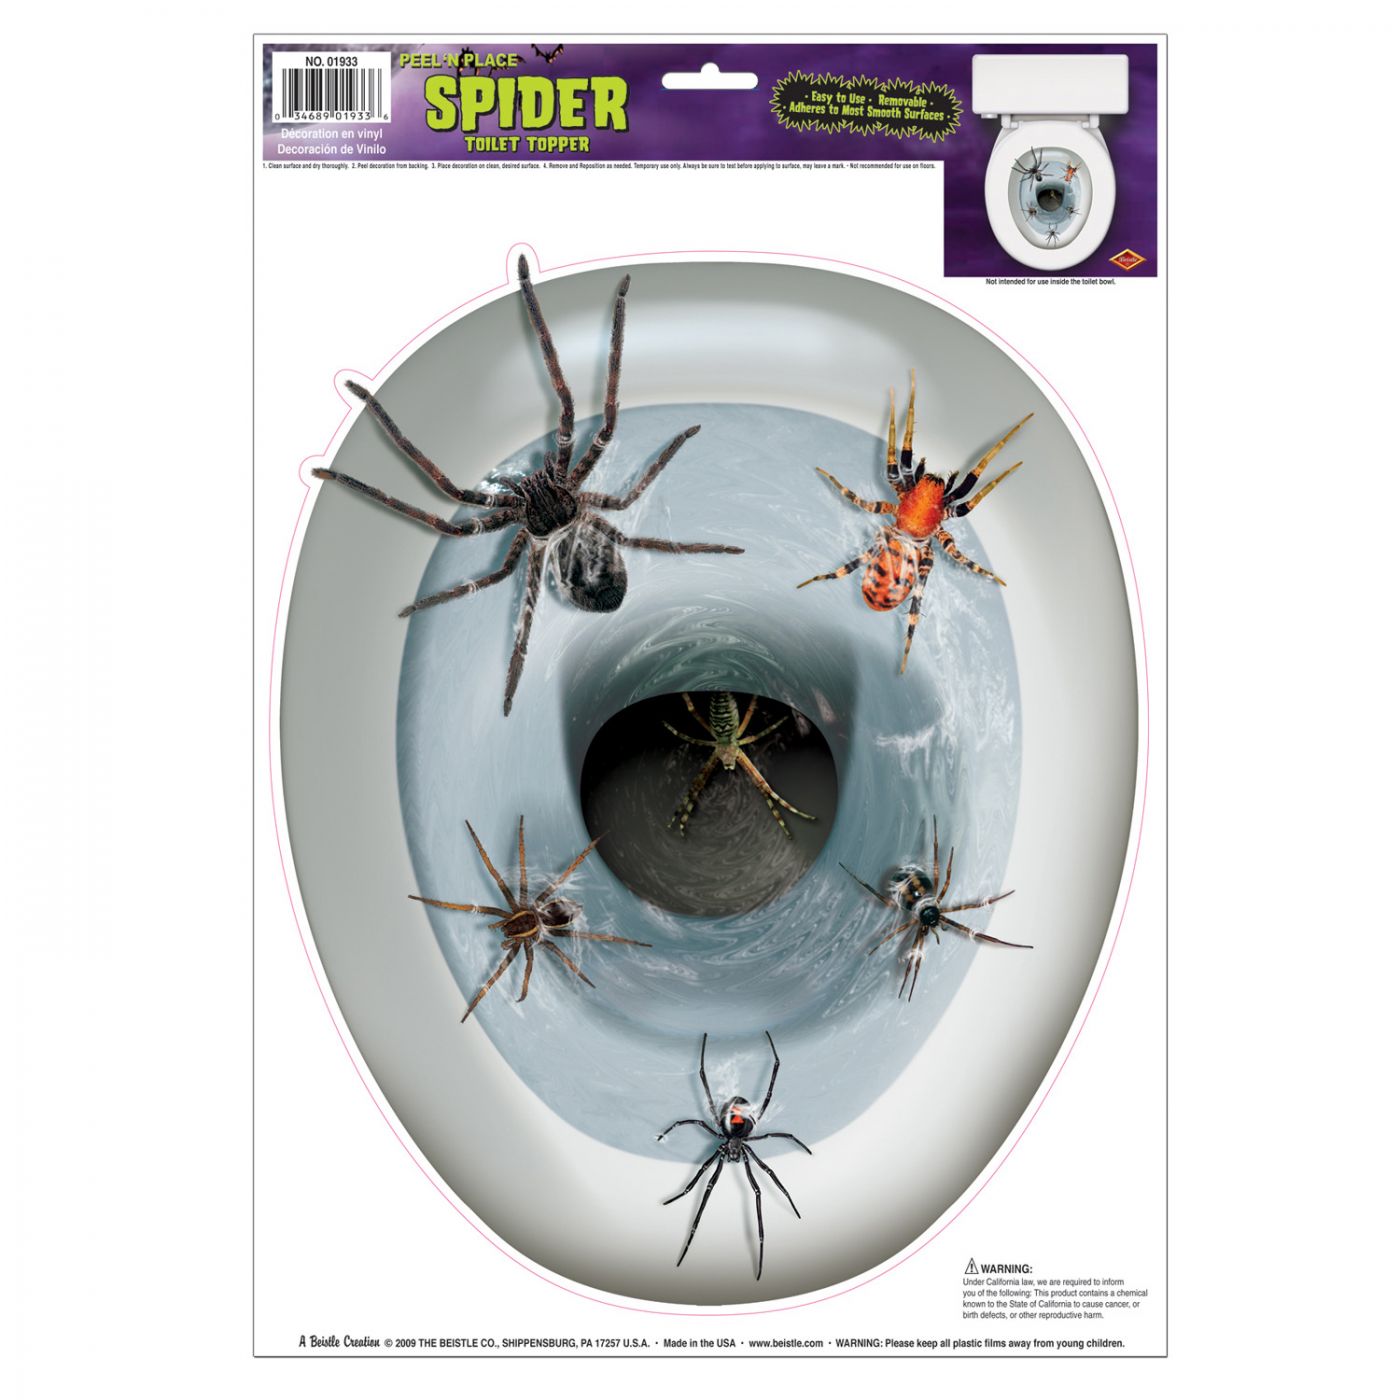 Spider Toilet Topper Peel 'N Place (12) image